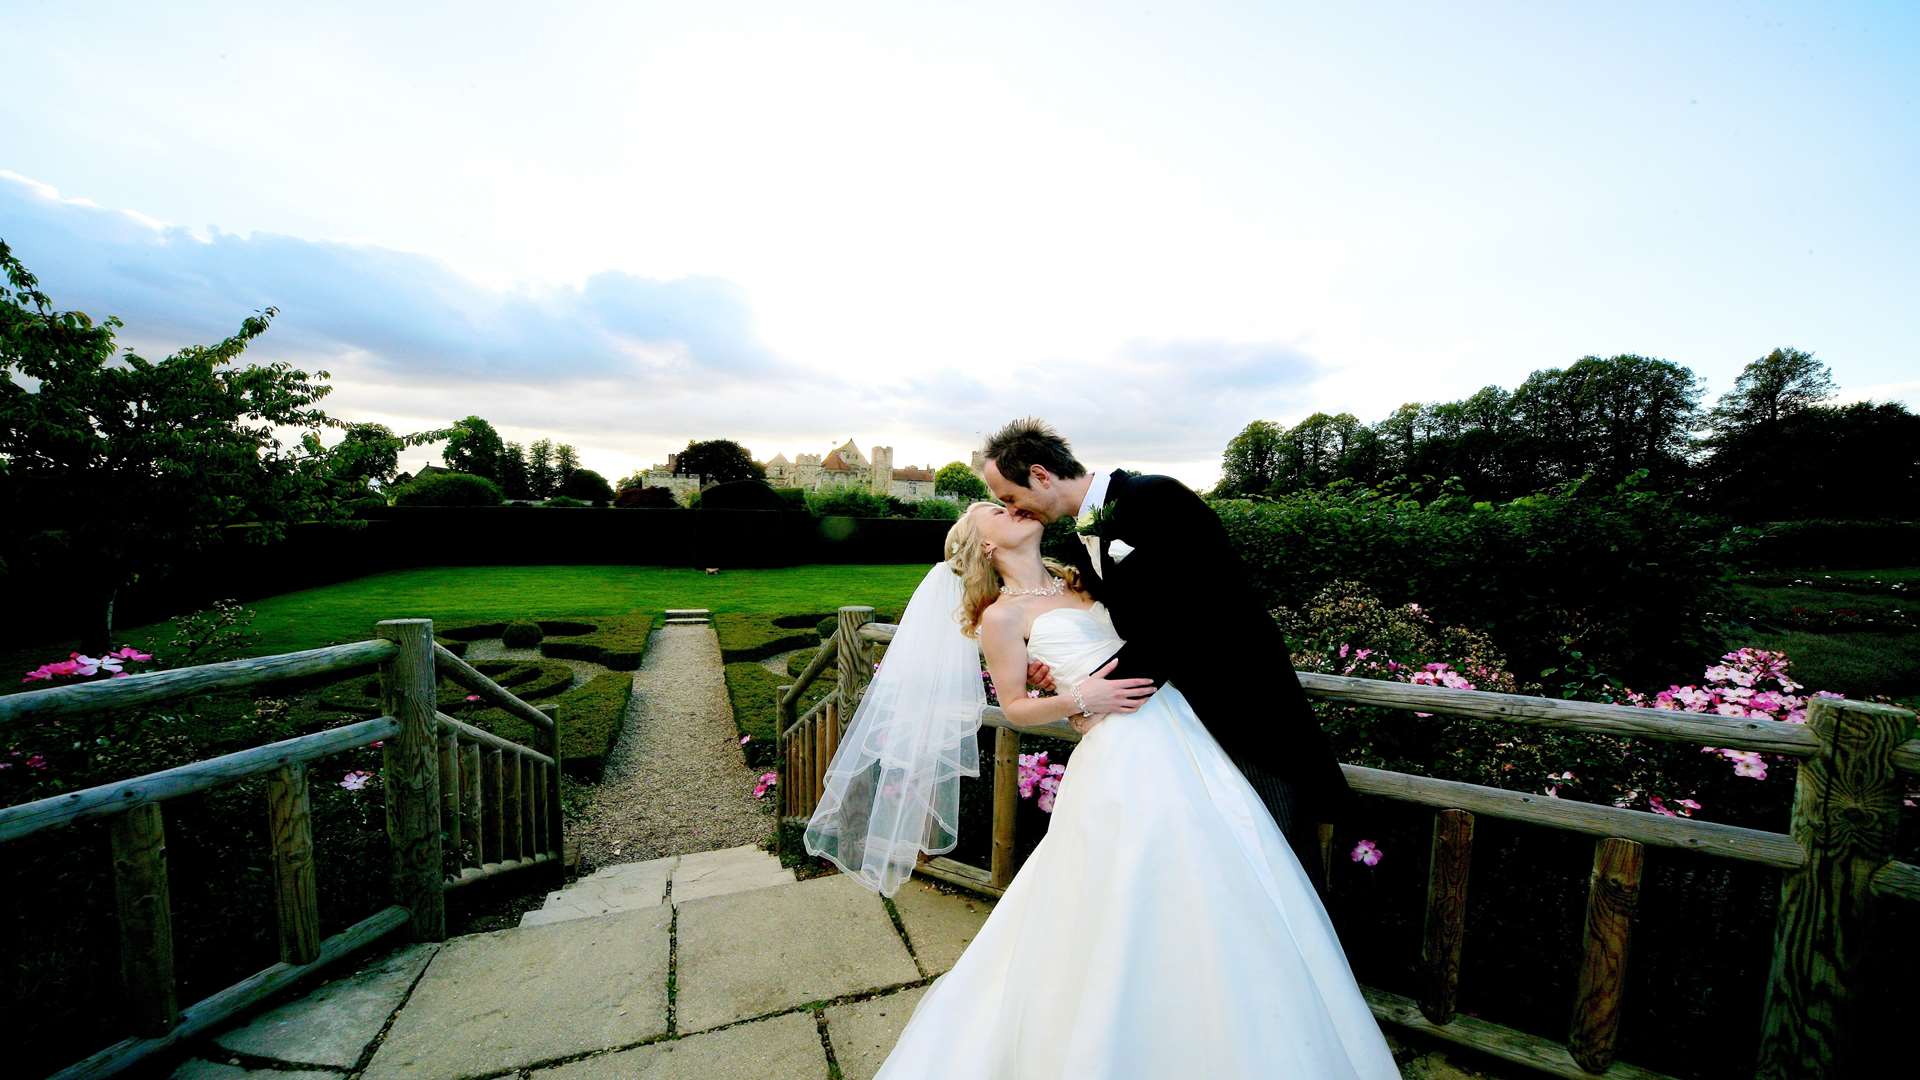 Couples hoping to tie the knot can register for the Penshurst Place wedding open day